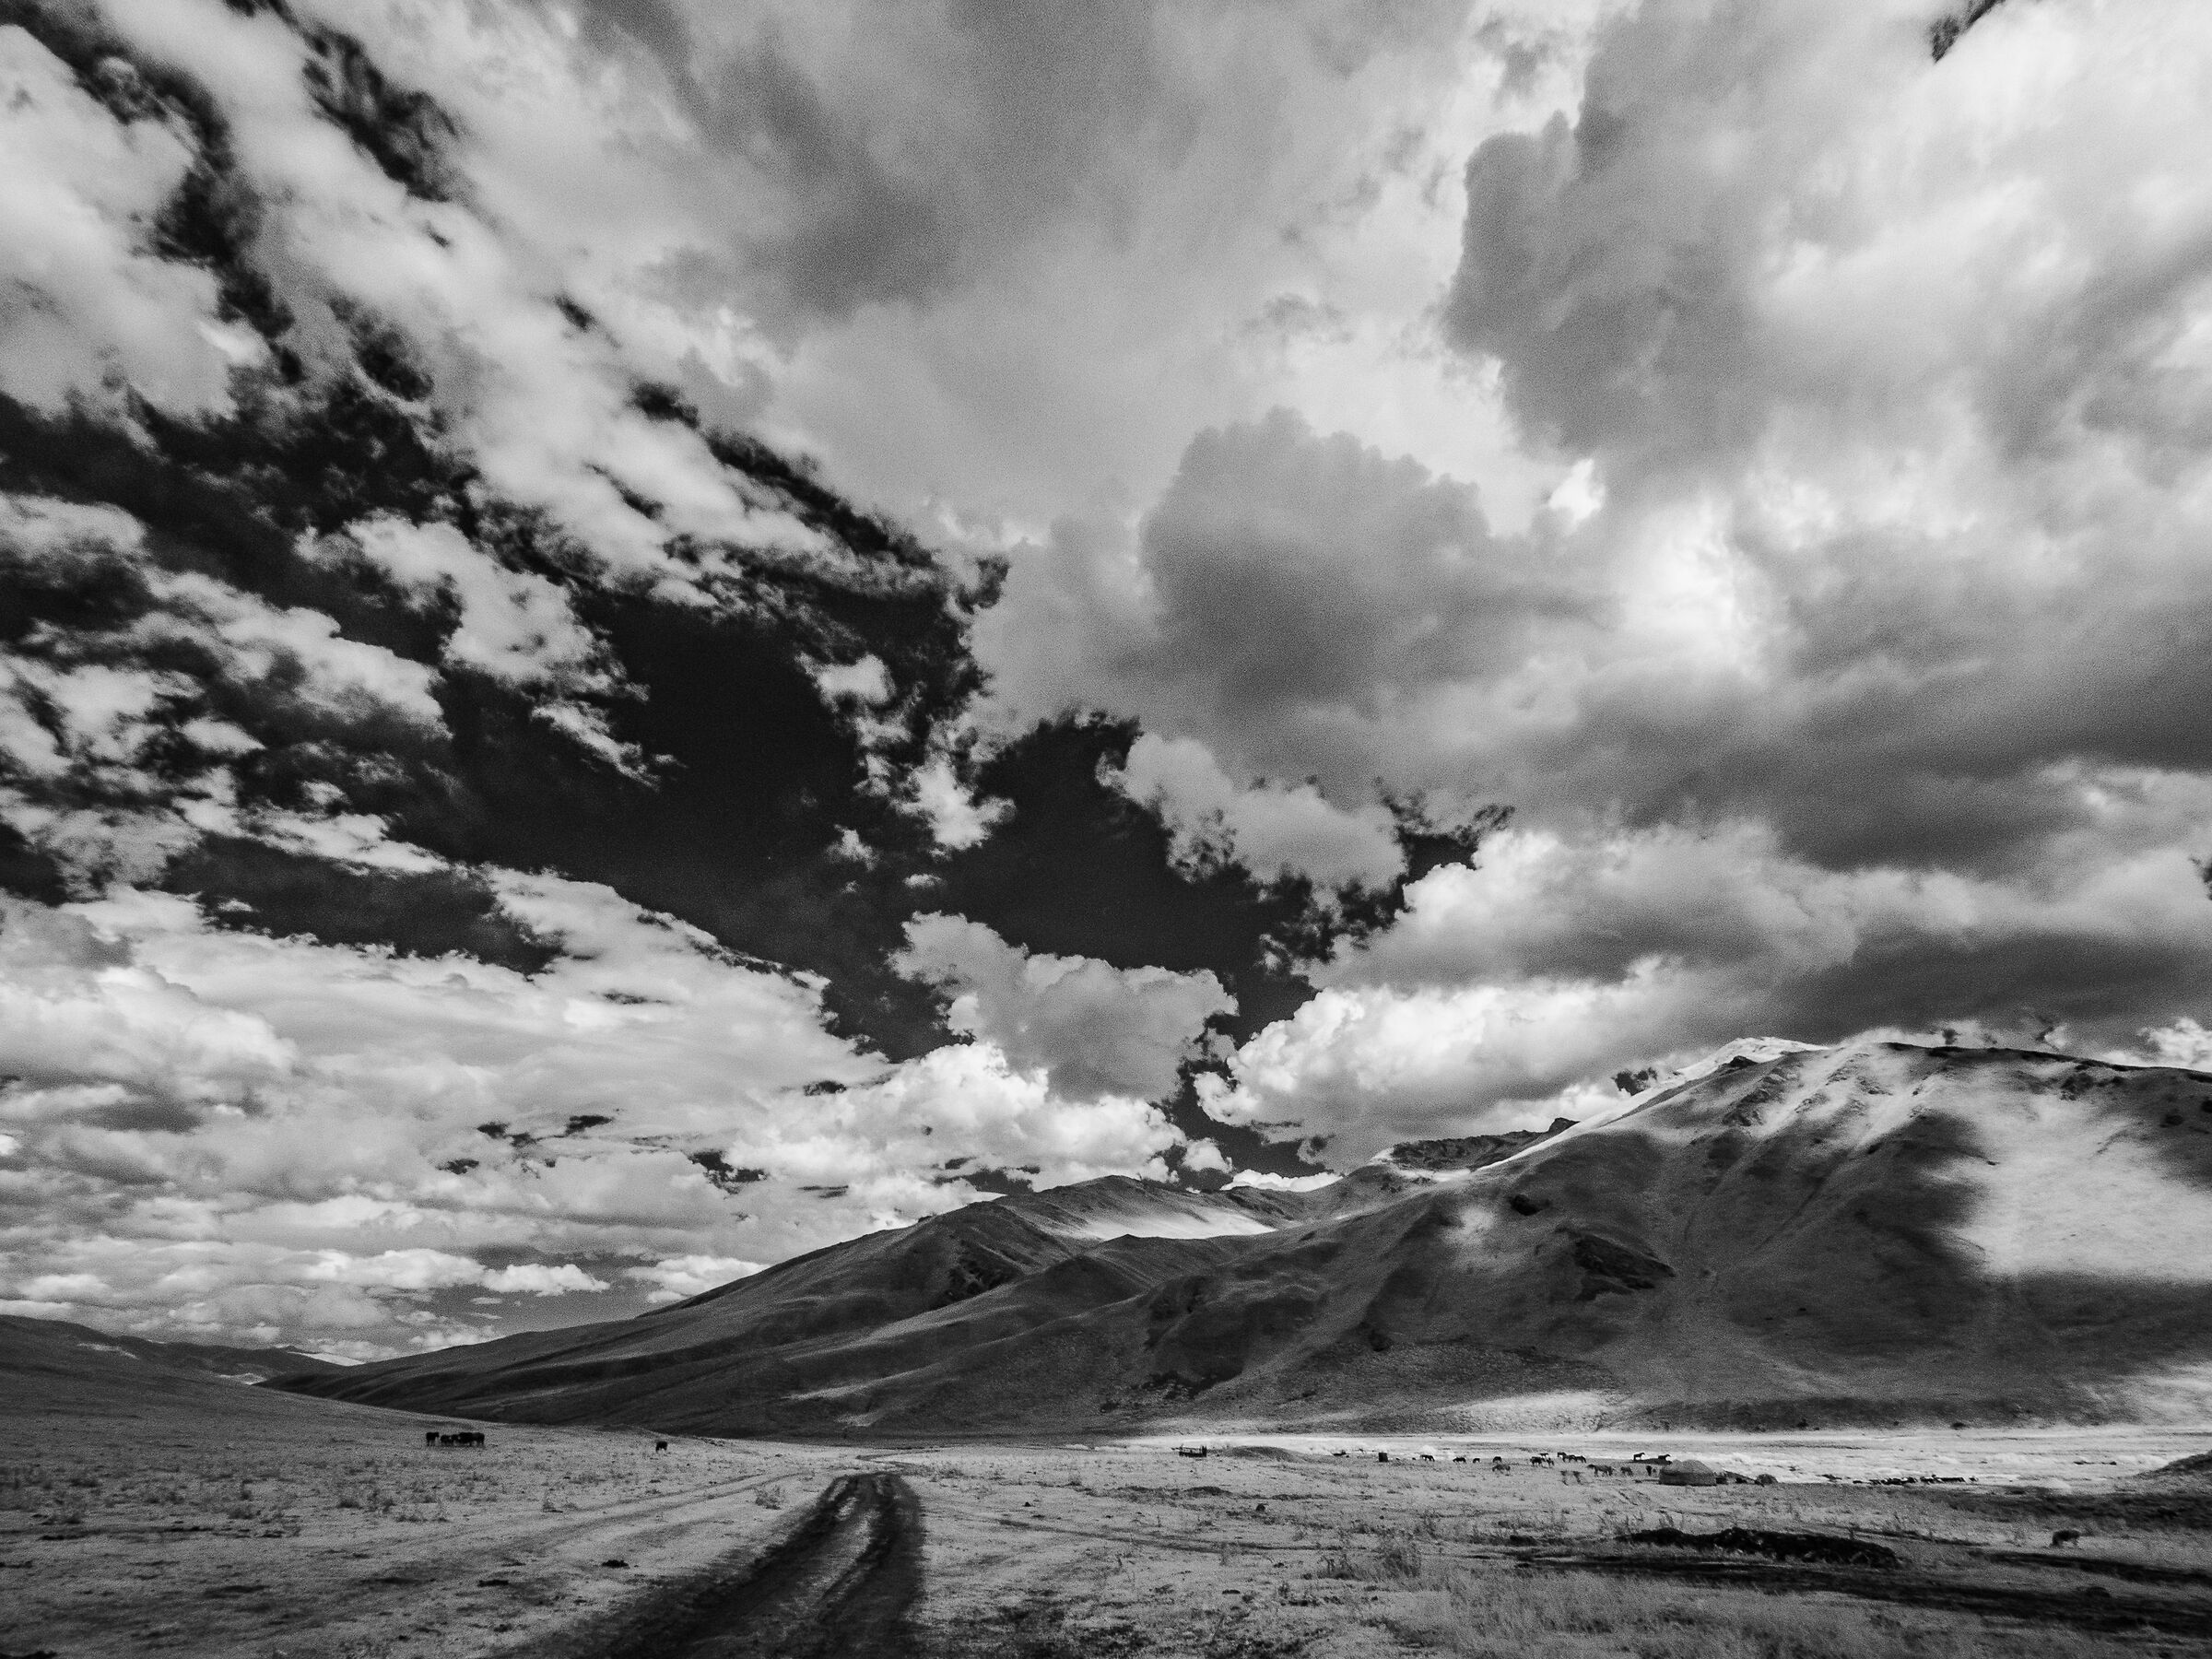 Kyrgyz heights in infrared...